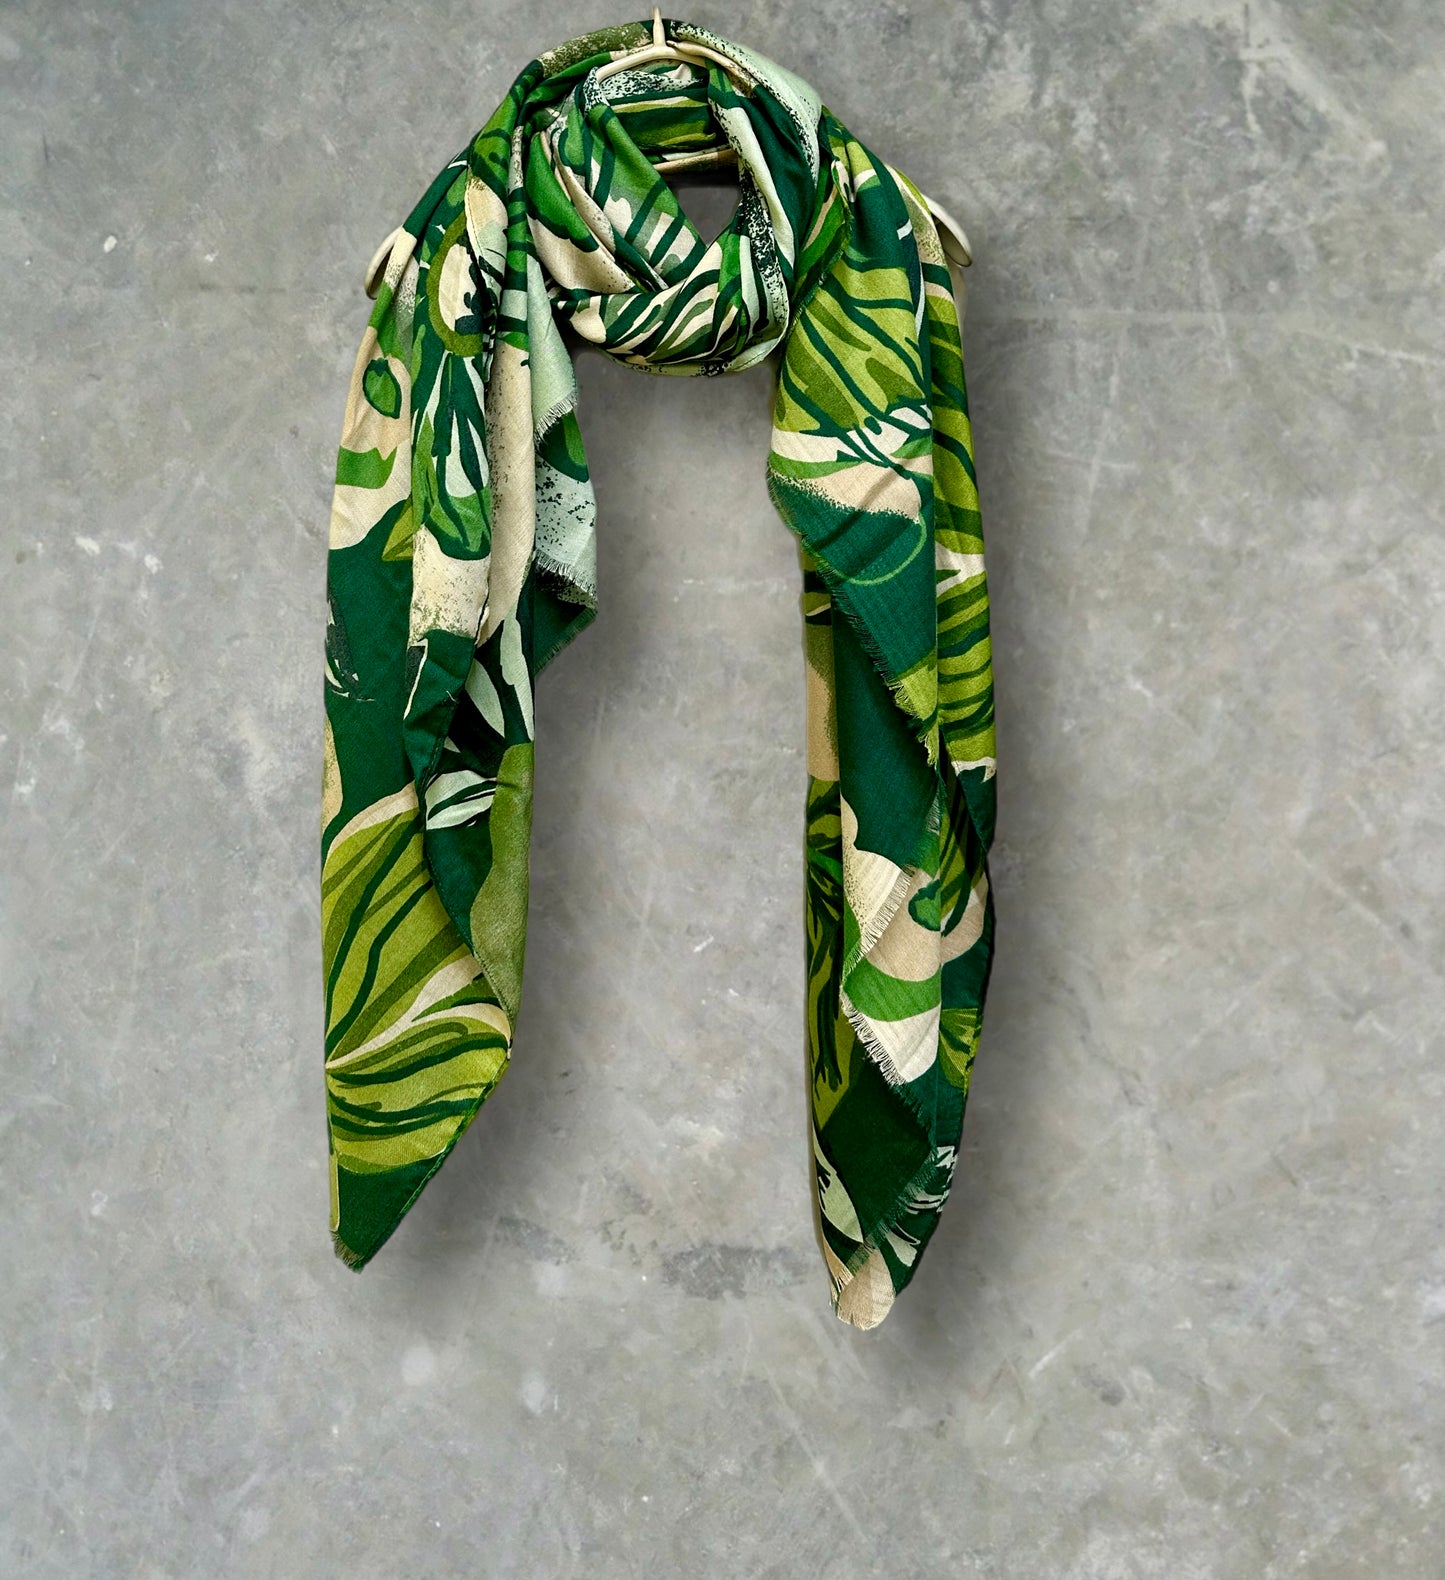 Vintage Inspired Green Floral Scarf for Women,Perfect All-Year Accessory,Ideal Grey Gifts for Mother's Day,Birthday, and Christmas.